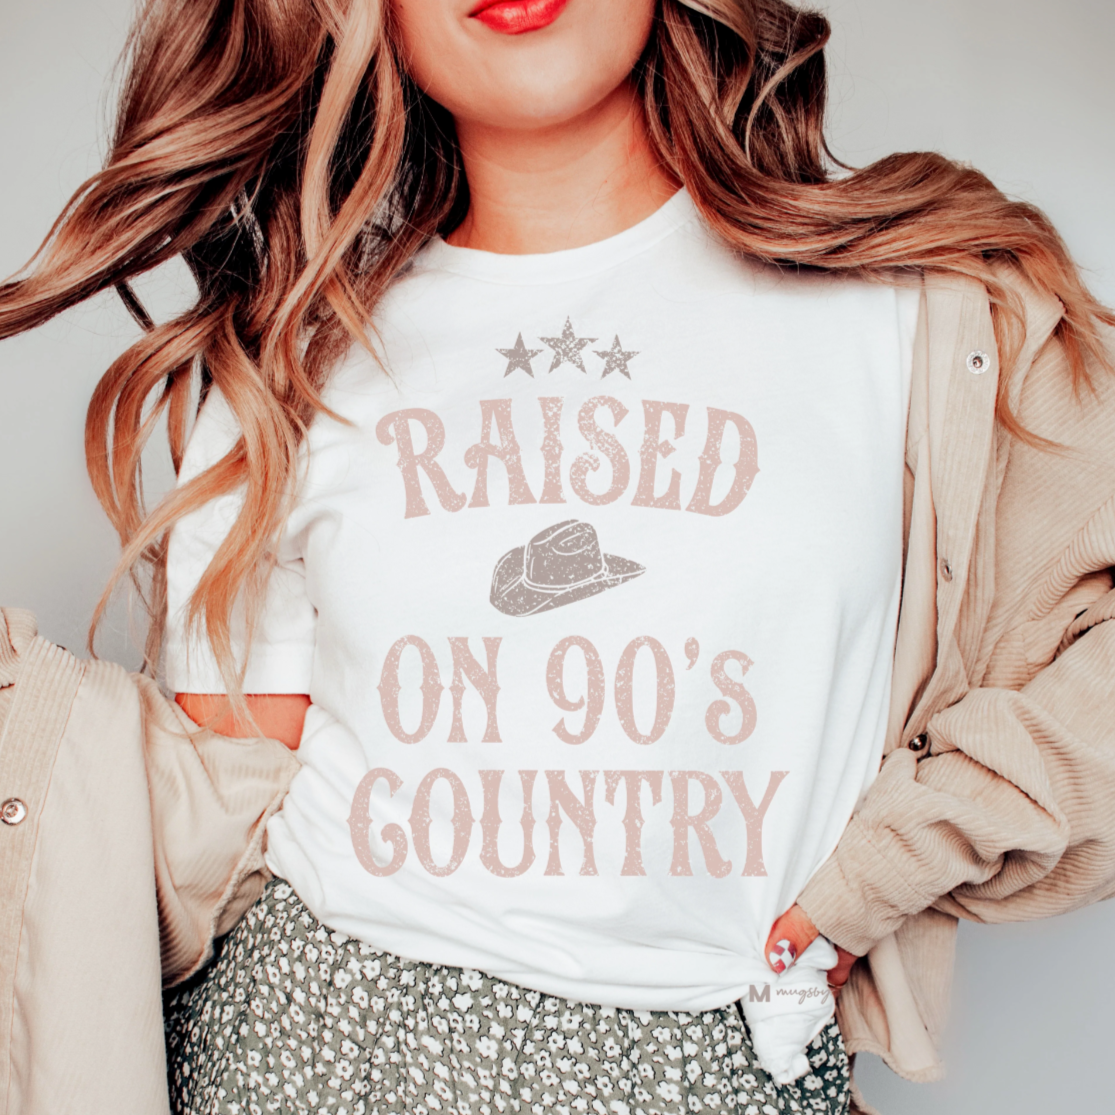 Raised On 90's Country White Tee